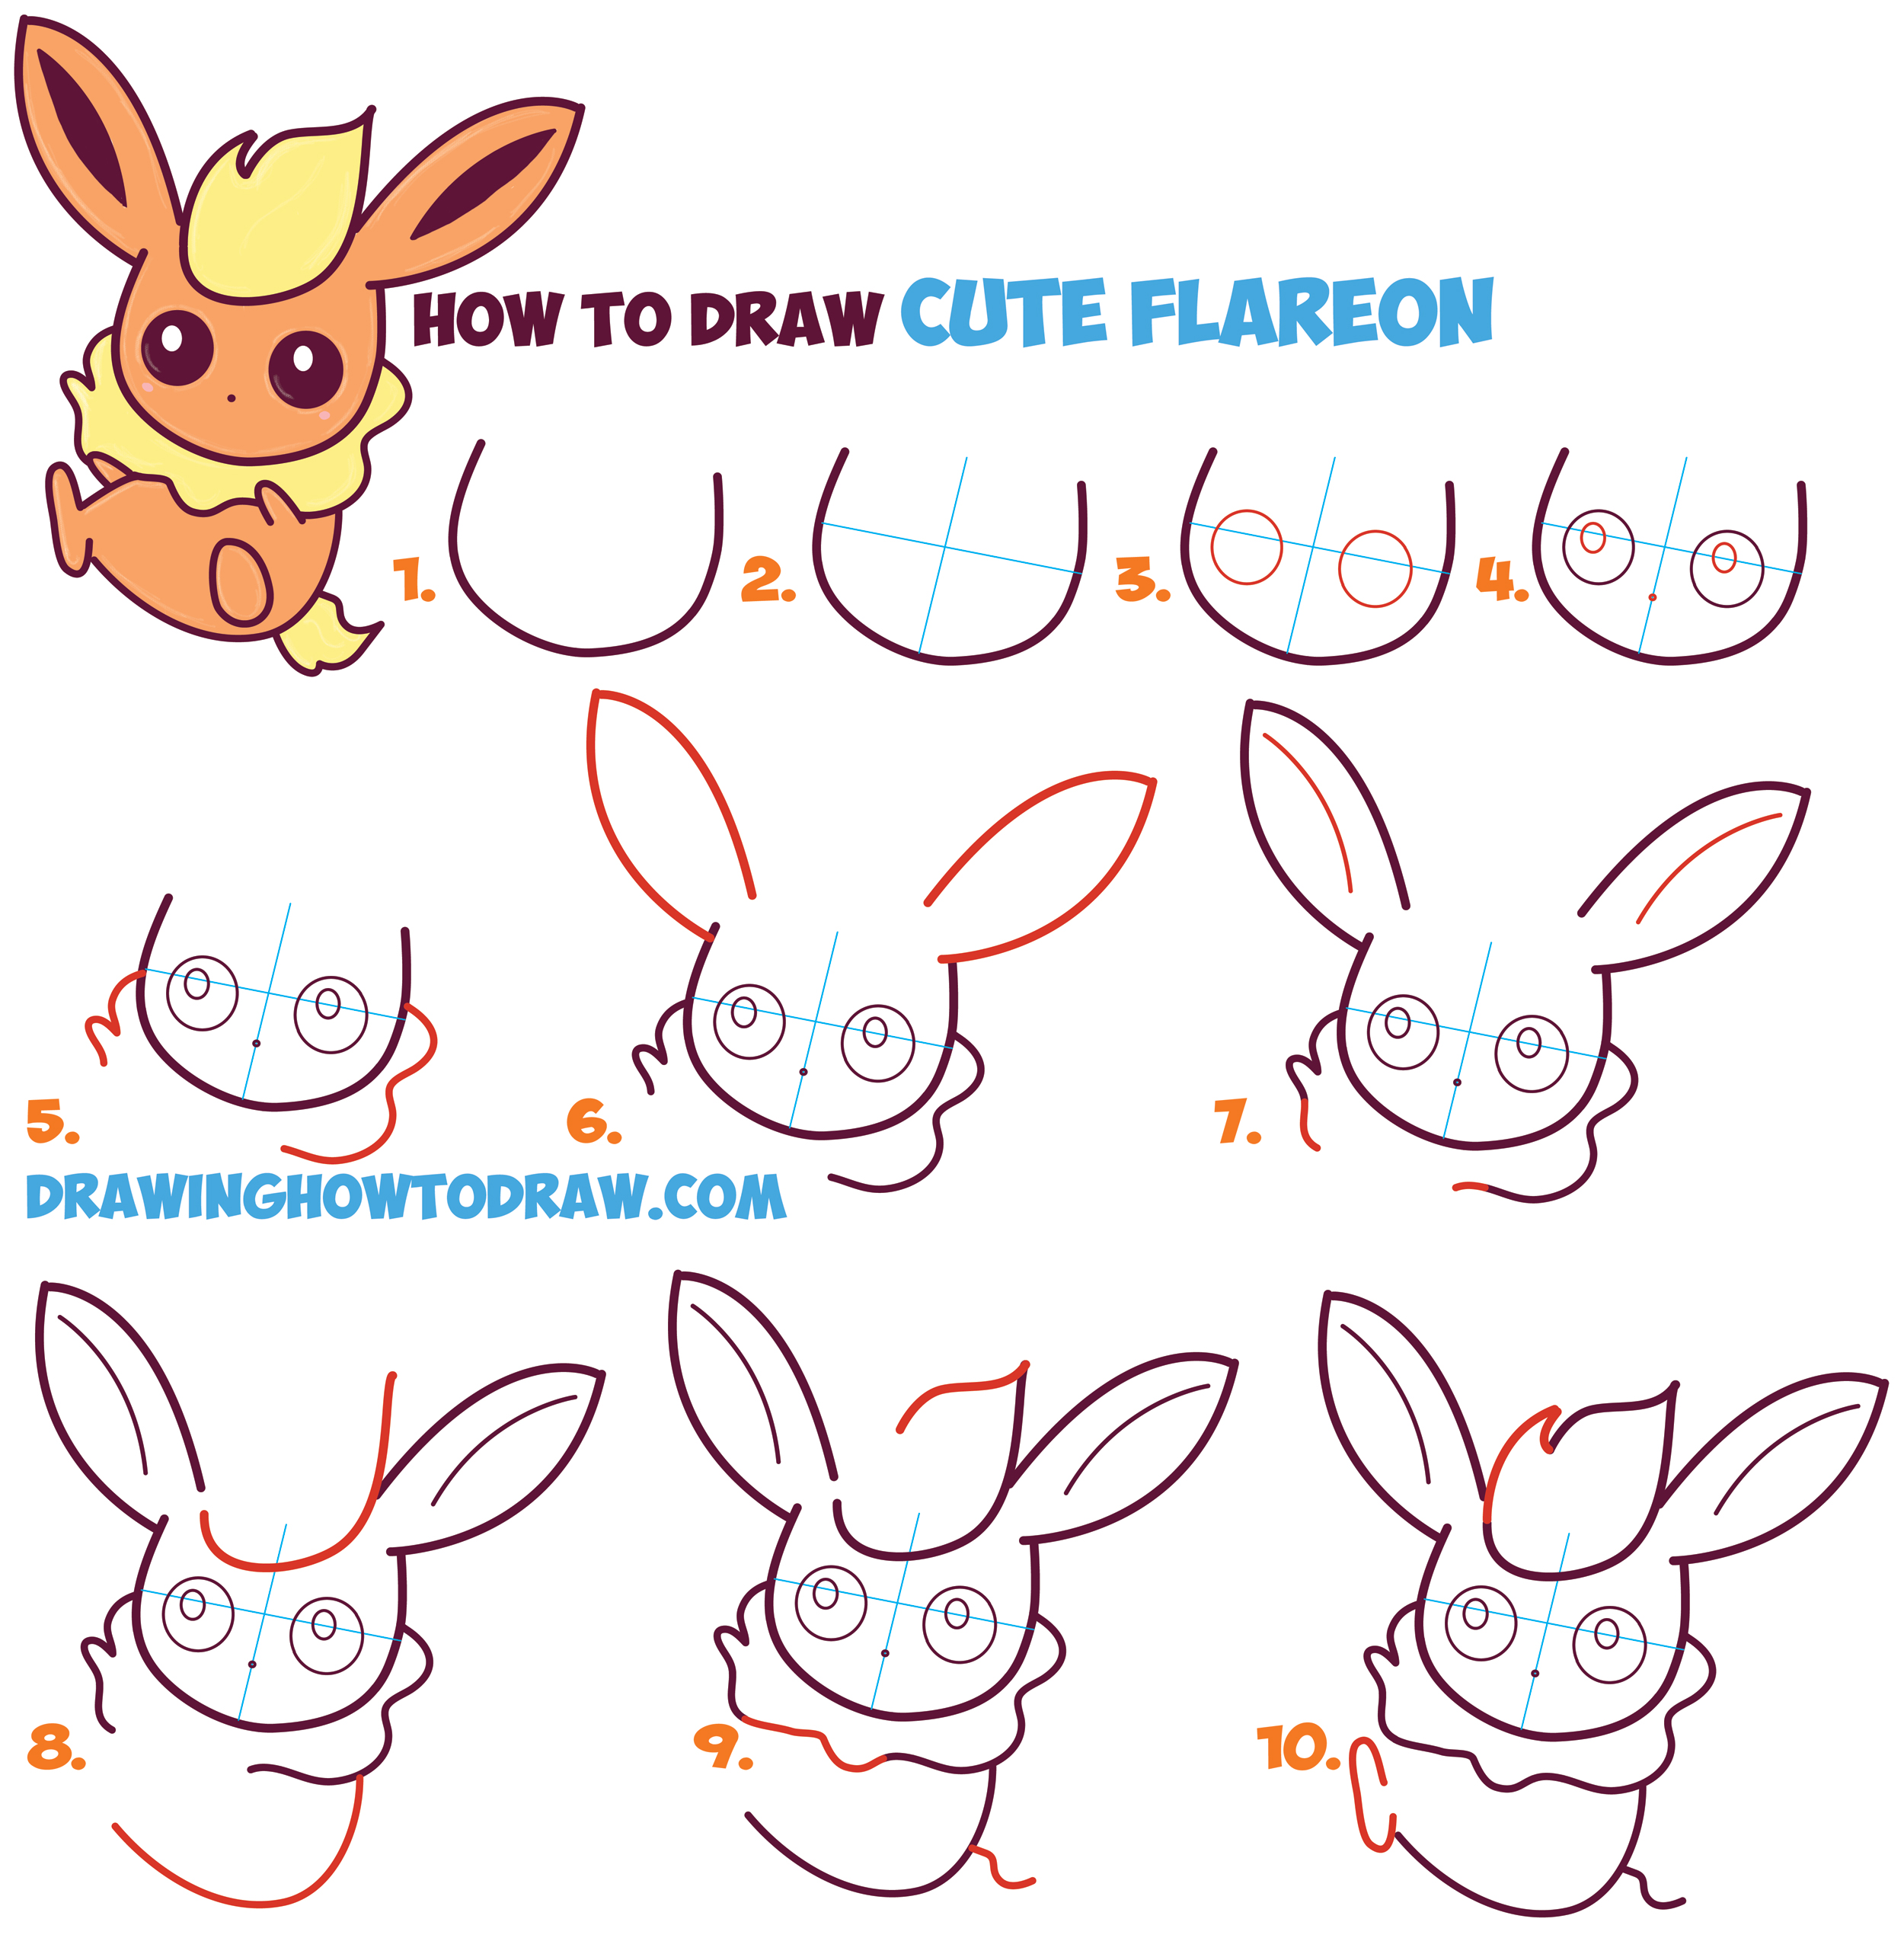 How to Draw Flareon in Cute / Kawaii / Chibi / Baby Style from Pokemon